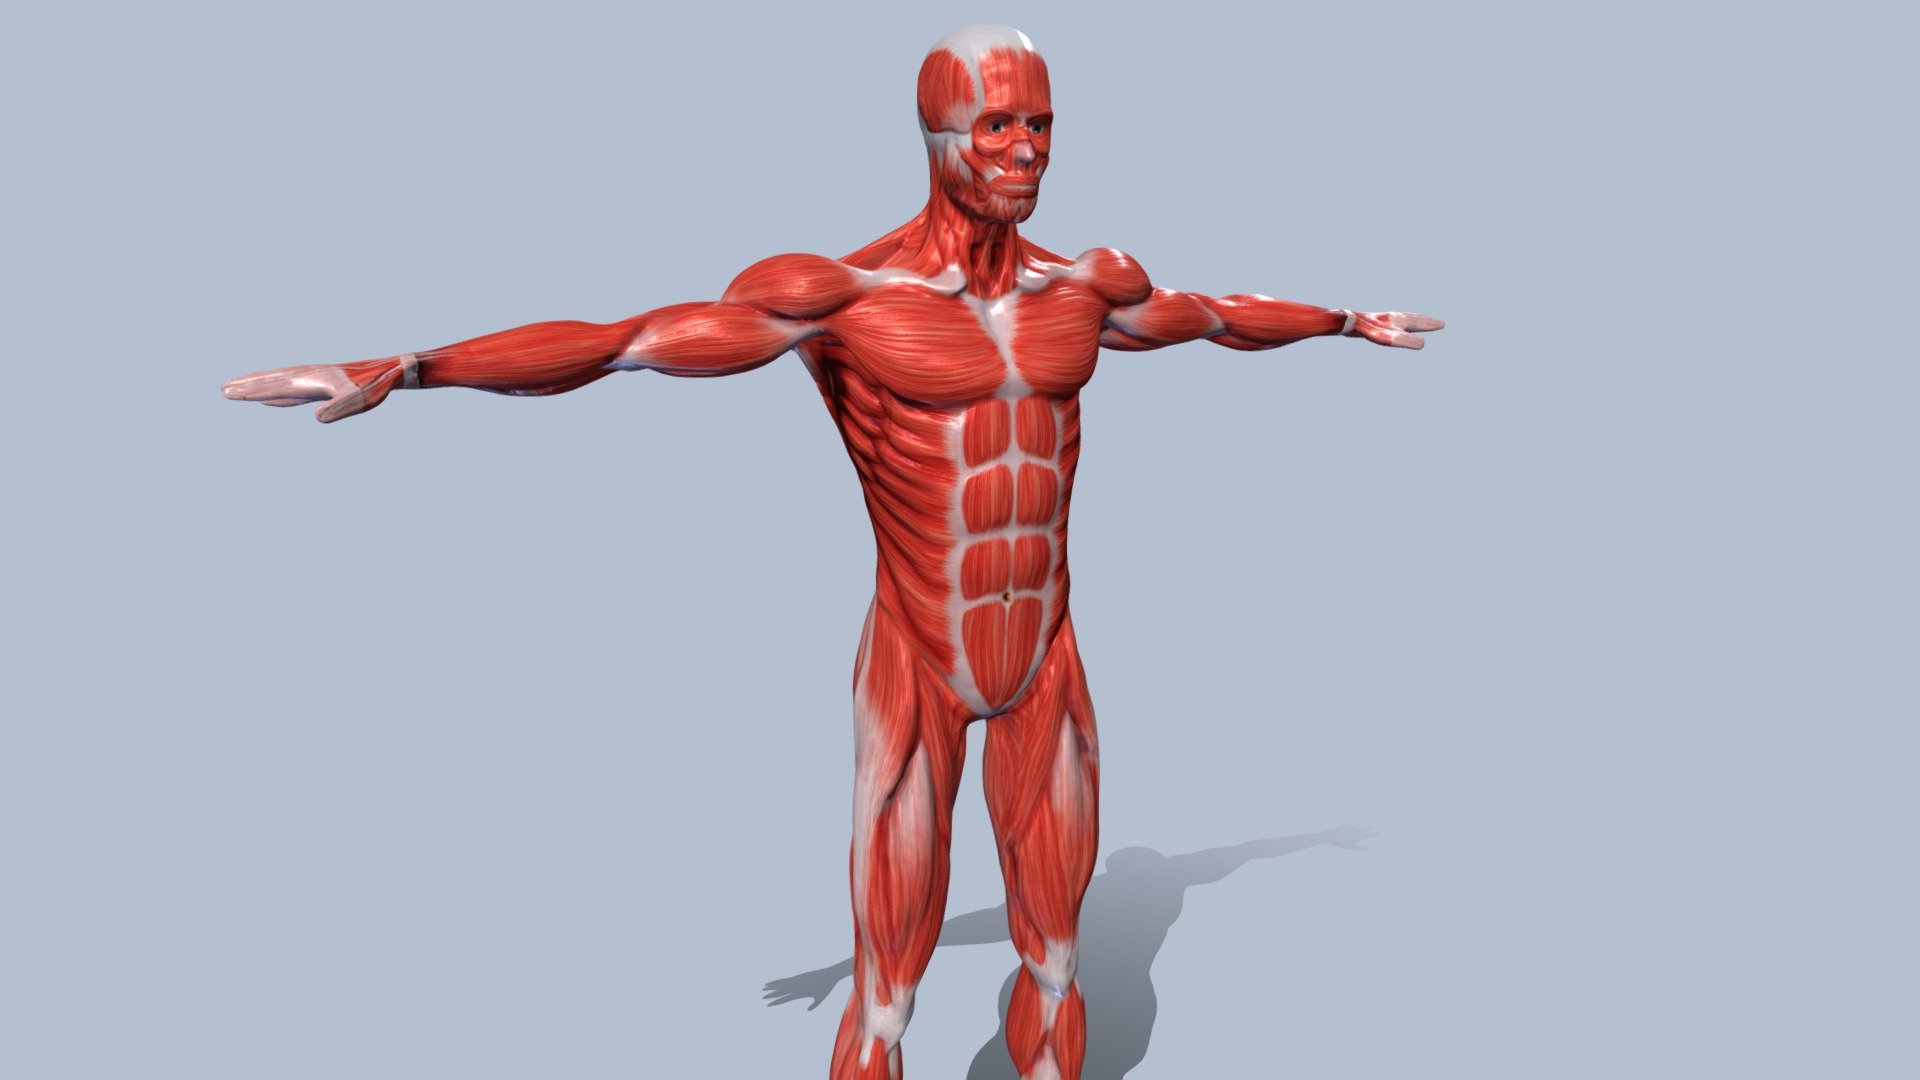 ThisThis is a male character with all the muscles hand-textured, in Zbrush.
full HD resolution quality, includes normalmap to notice the grooves of the muscles 3d model